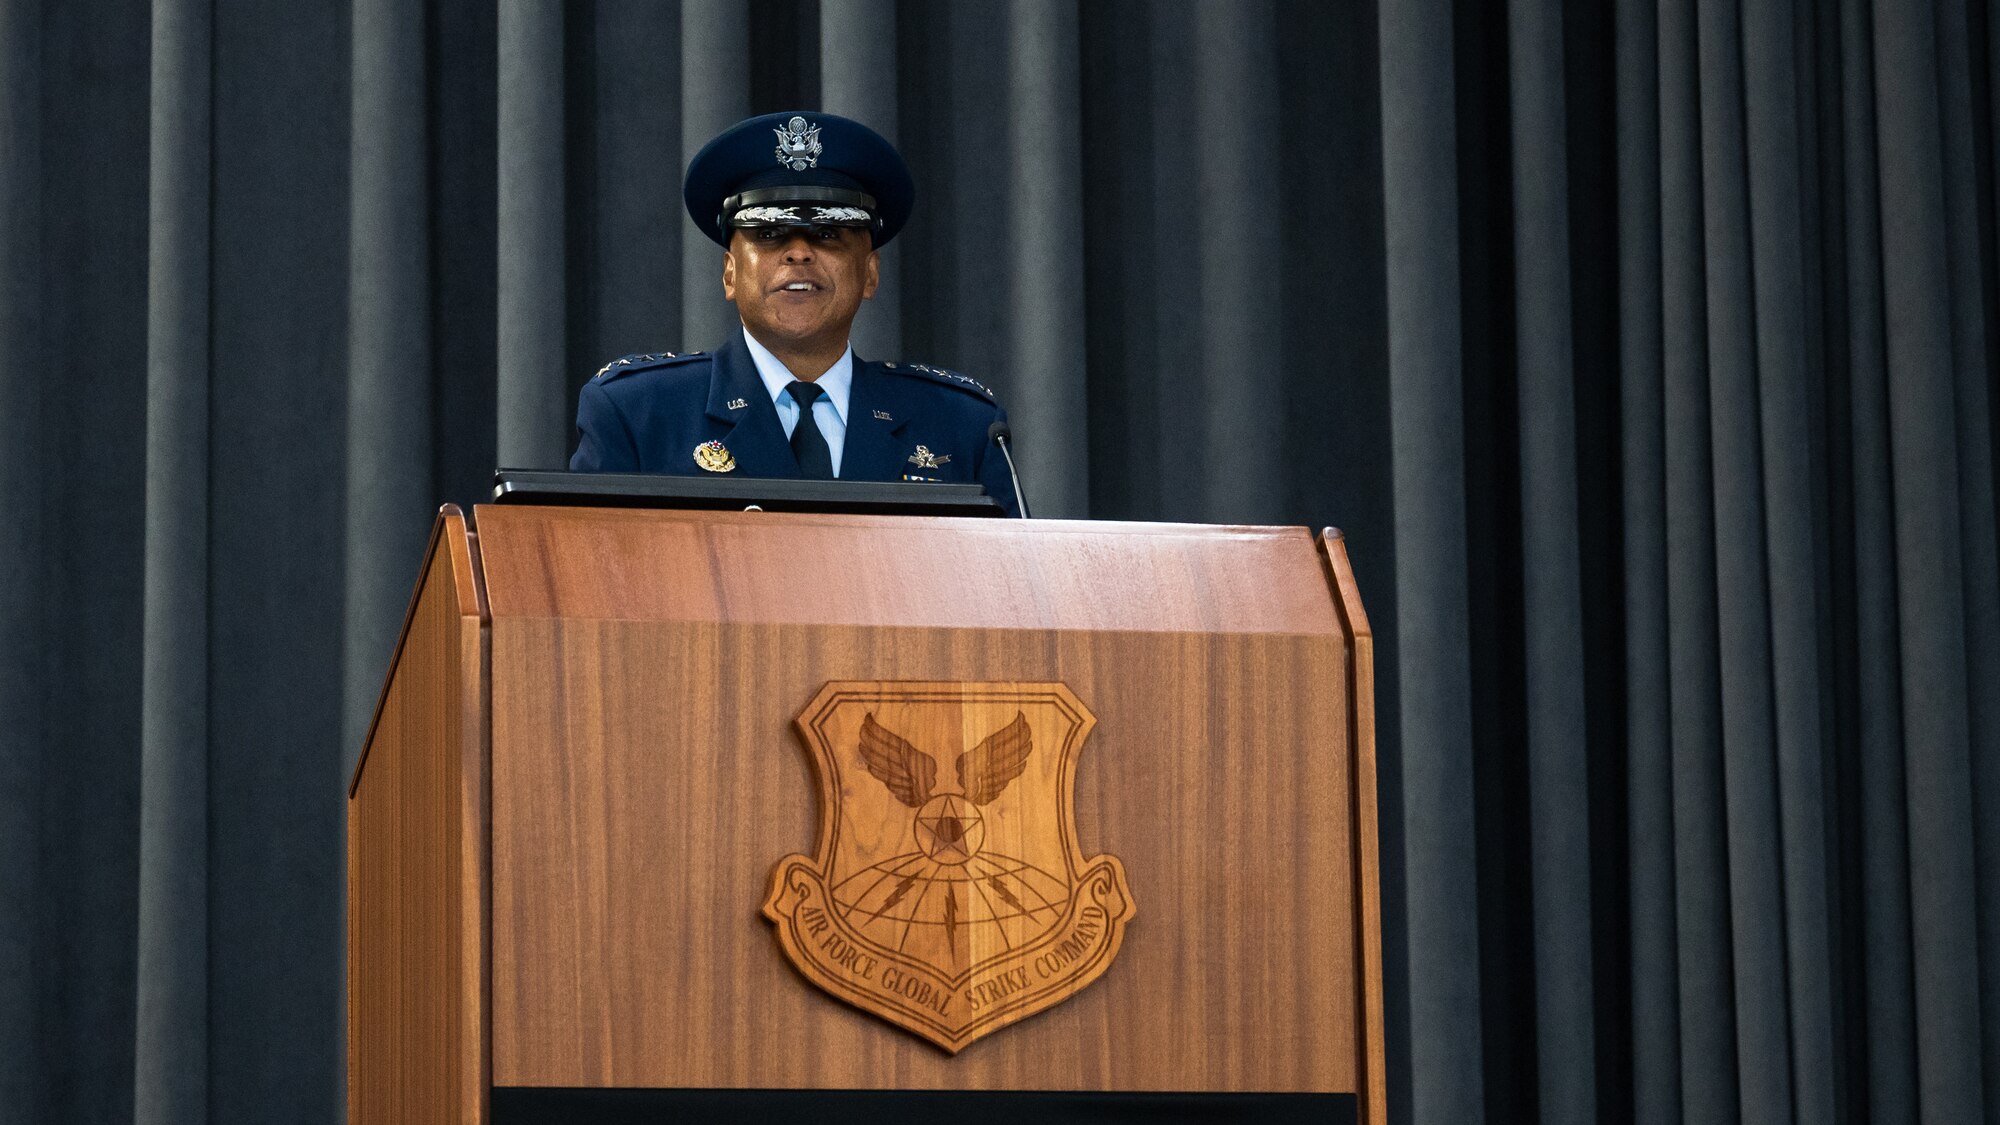 Gen. Anthony Cotton, incoming Air Force Global Strike Command commander, makes remarks during the AFGSC change of command ceremony at Barksdale Air Force Base, Louisiana, Aug. 27, 2021. Previously serving as AFGSC’s deputy commander, Cotton takes command of the 33,700 professionals who provide the nation with strategic deterrence, global strike and combat support anytime, anywhere. (U.S. Air Force photo by Senior Airman Jacob B. Wrightsman)